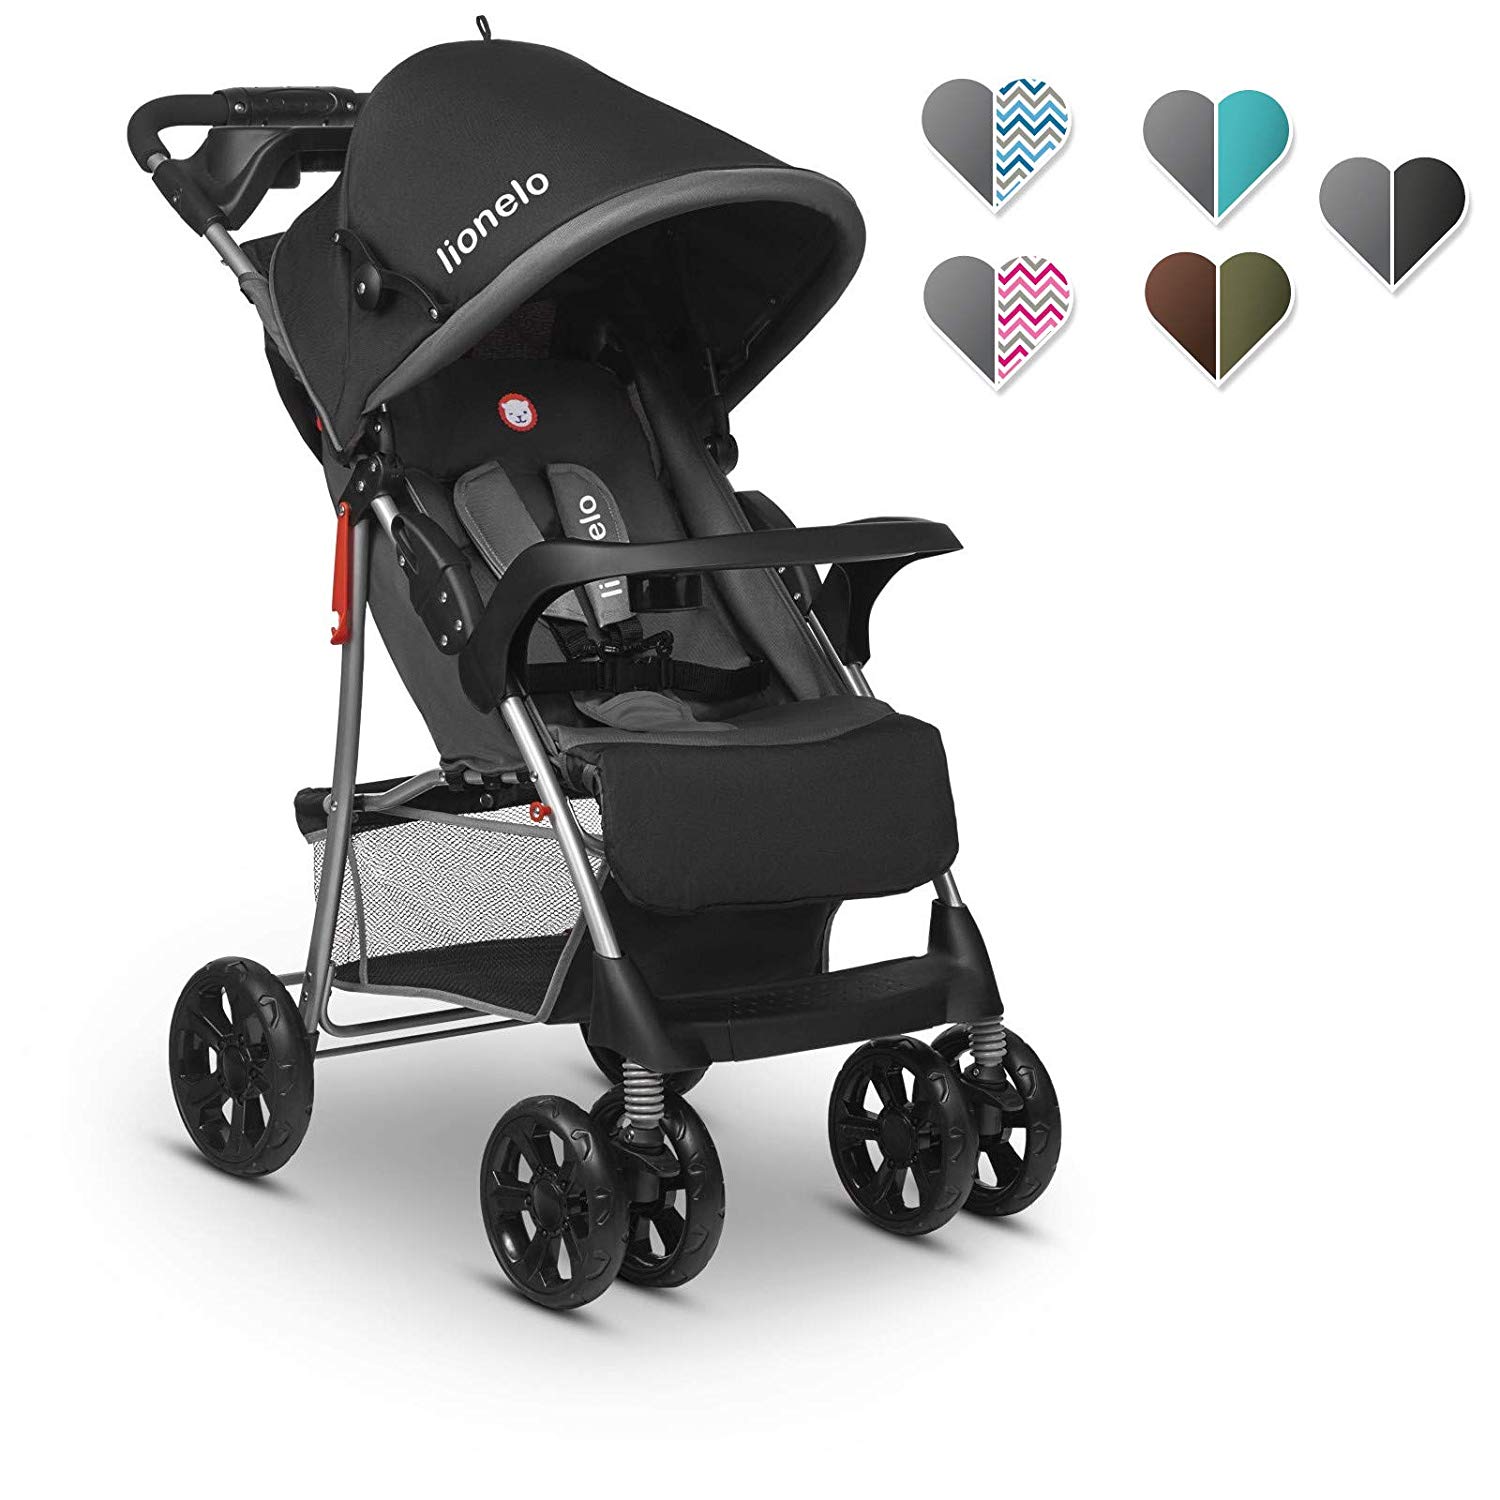 Lionelo Emma Plus Pushchair Lightweight Modern Small Buggy with Reclining Position Foldable